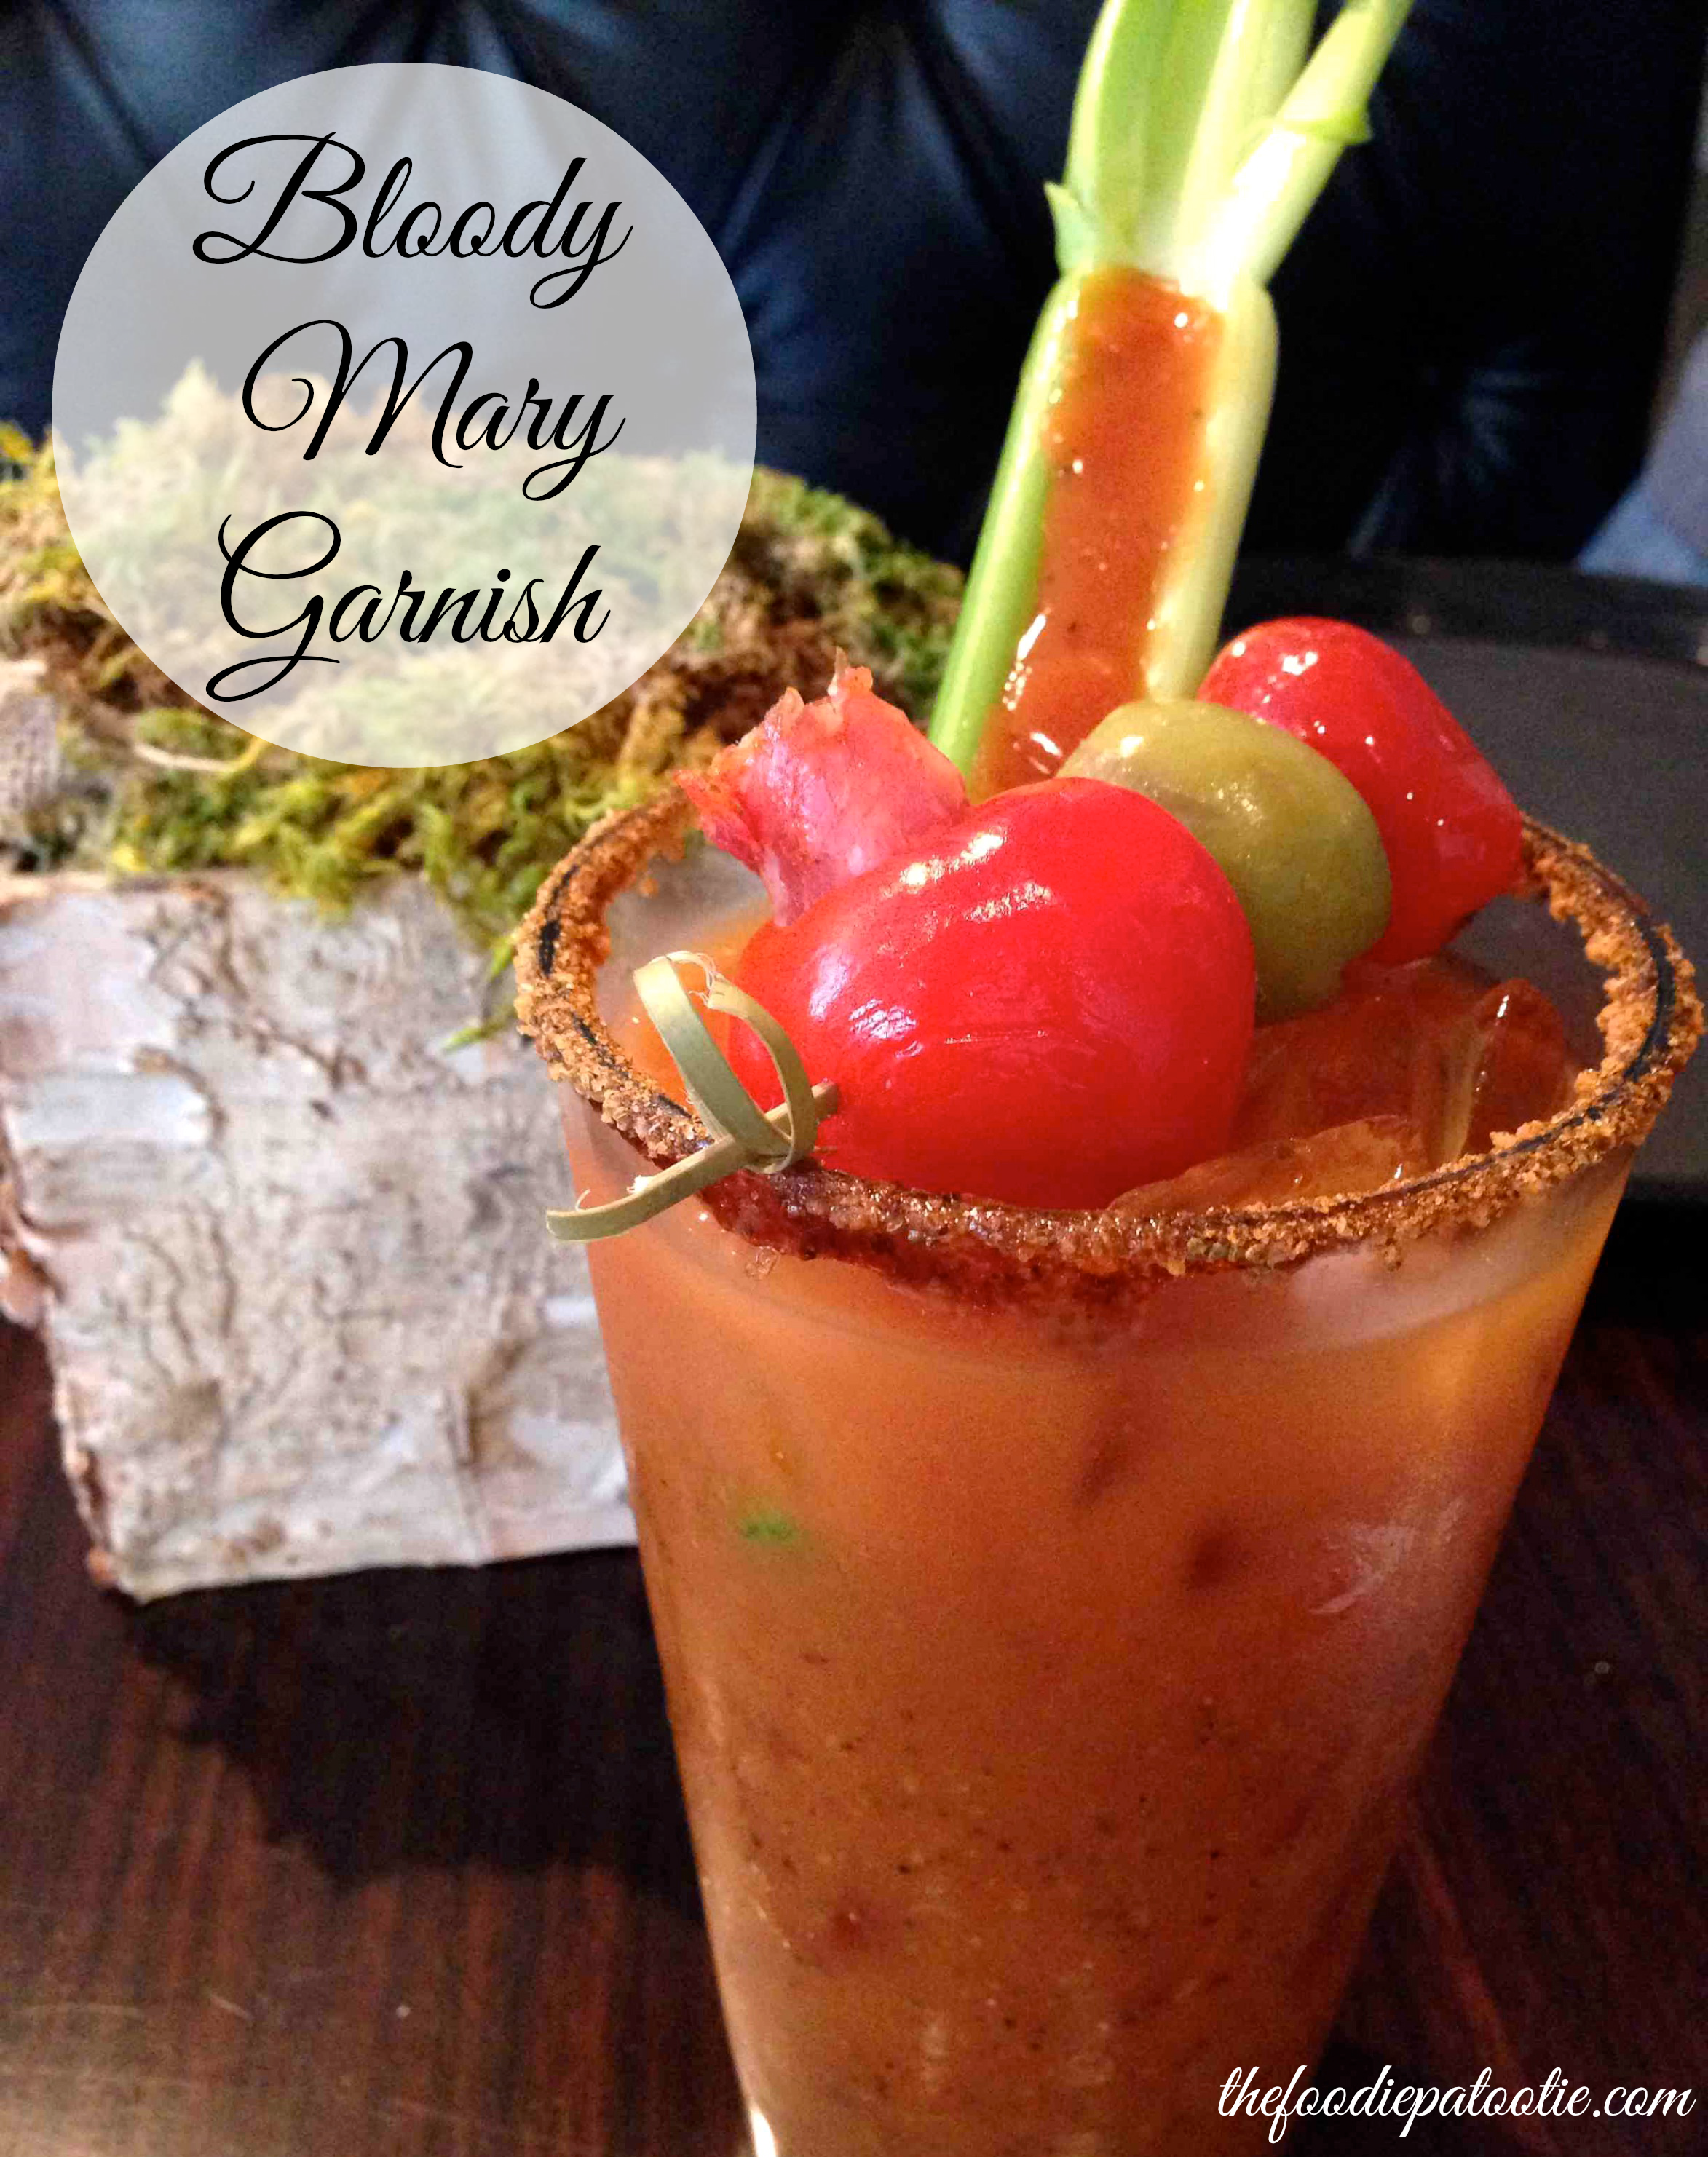 National Bloody Mary Day Bloody Mary Garnish.